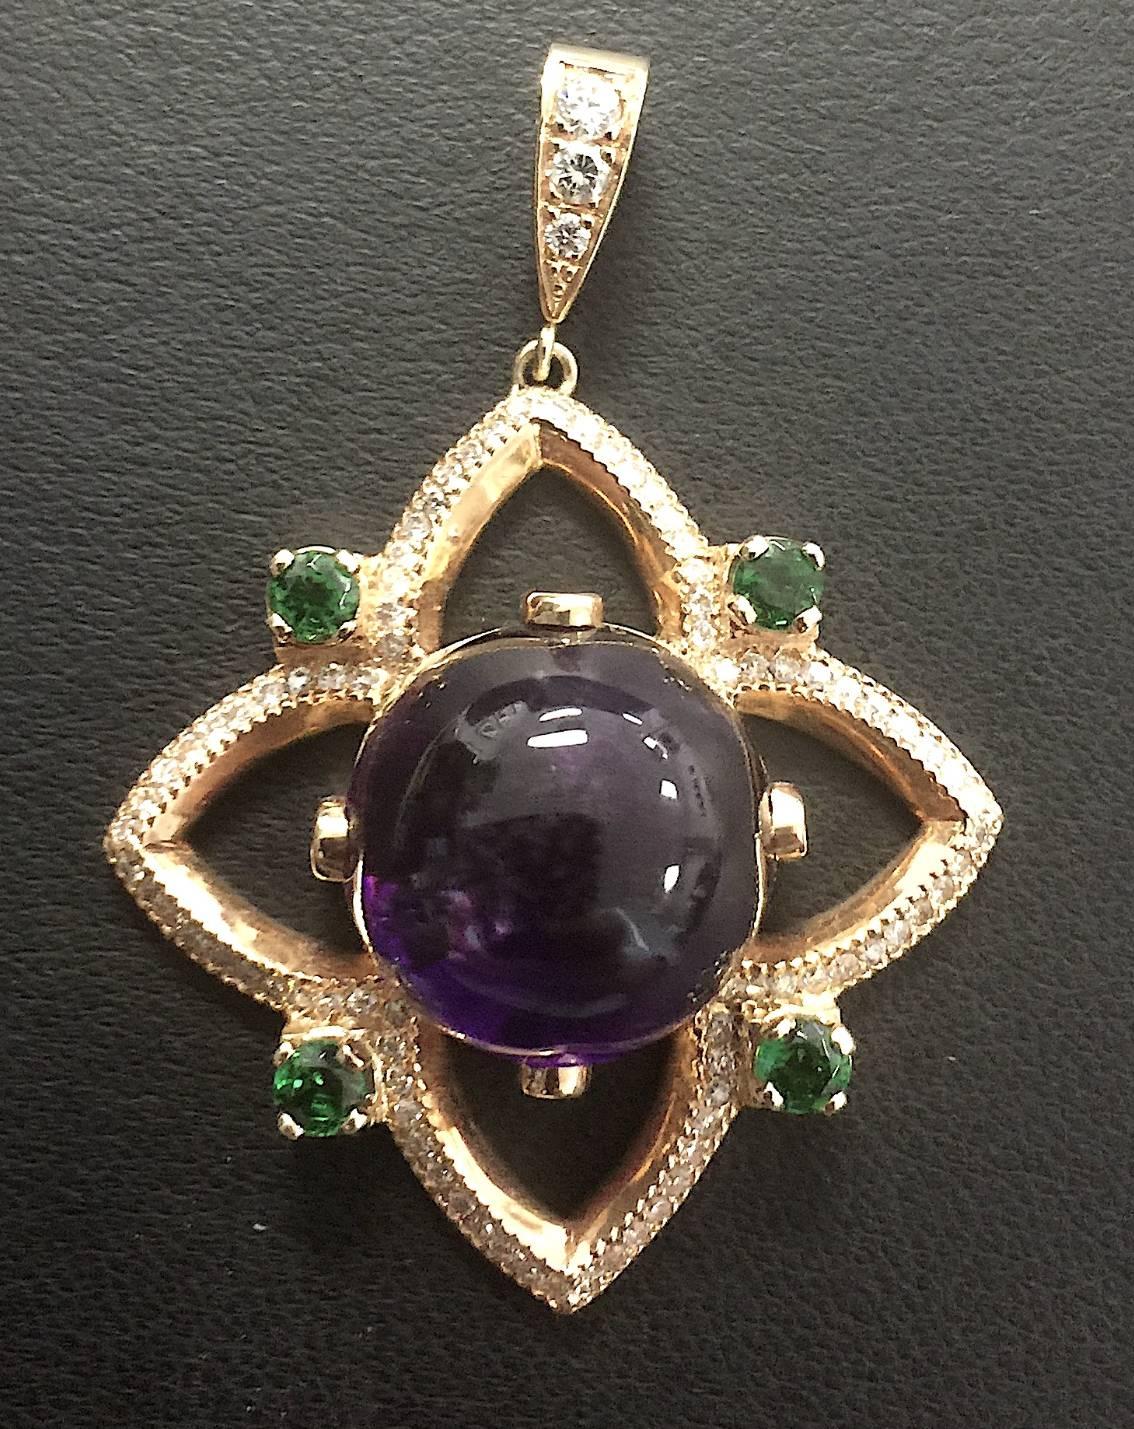 28 Carat Bolivian Amethyst Cabochon Pendant Set in 18K Rose Gold.

This pendant is set in 18k rose gold with a  28 cts. Bolivian amethyst cabochon in center. There is 1 cts. of diamonds and .77 cts. on Tsavorites to accent center stone. The diamonds